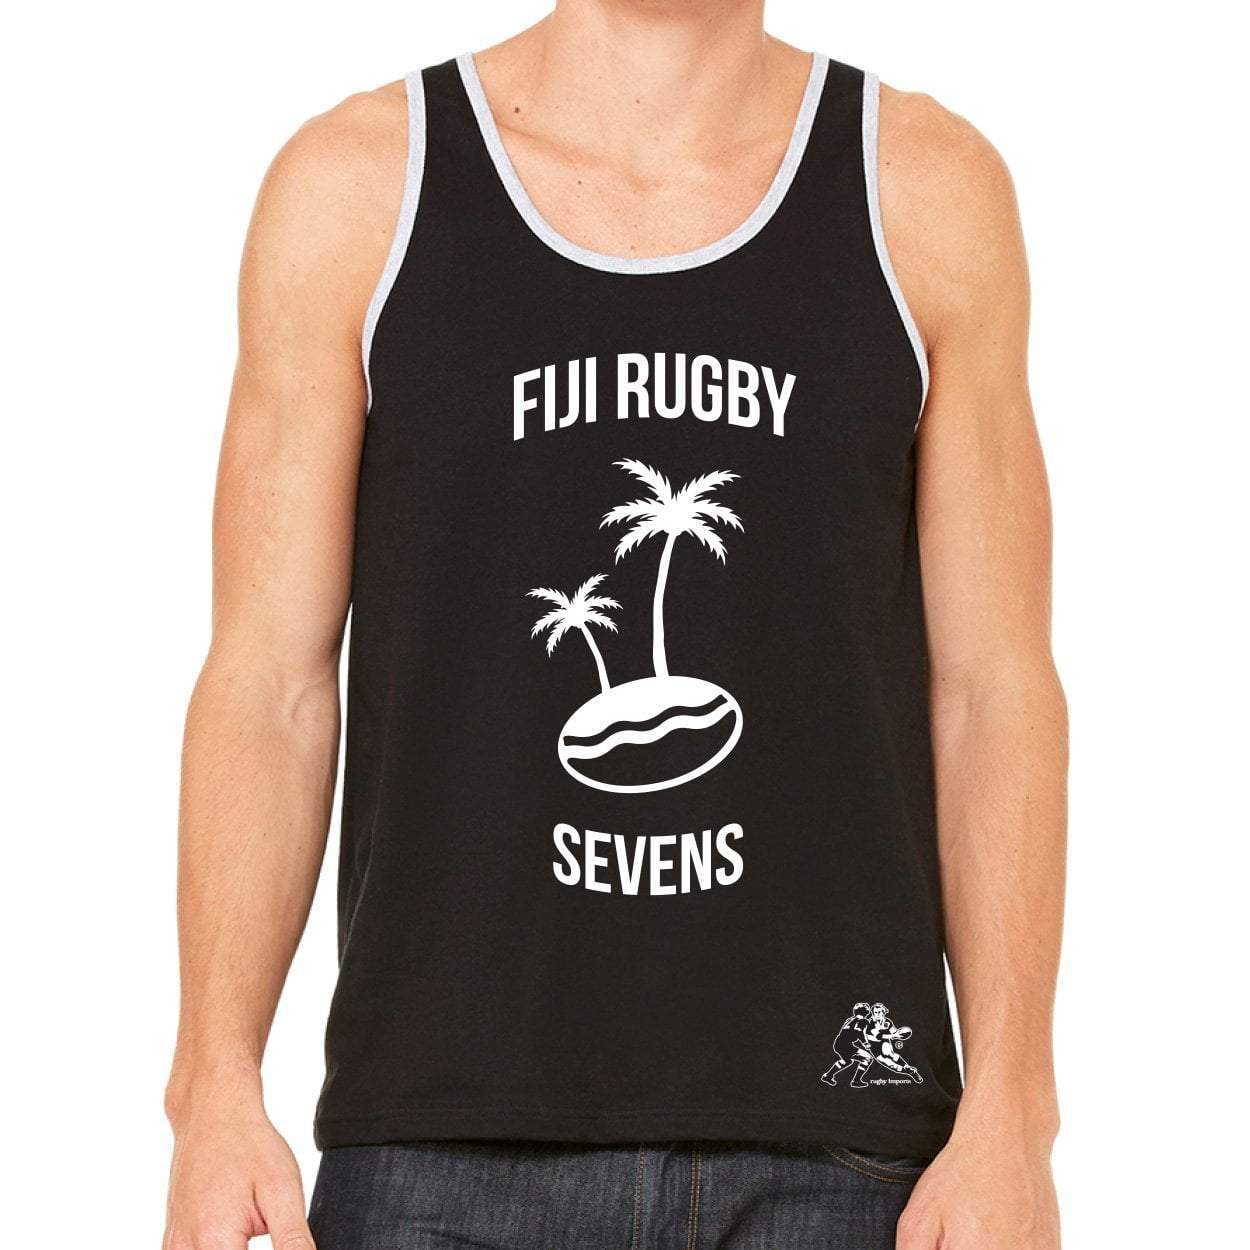 Rugby Imports Fiji Rugby Sevens Tank Top